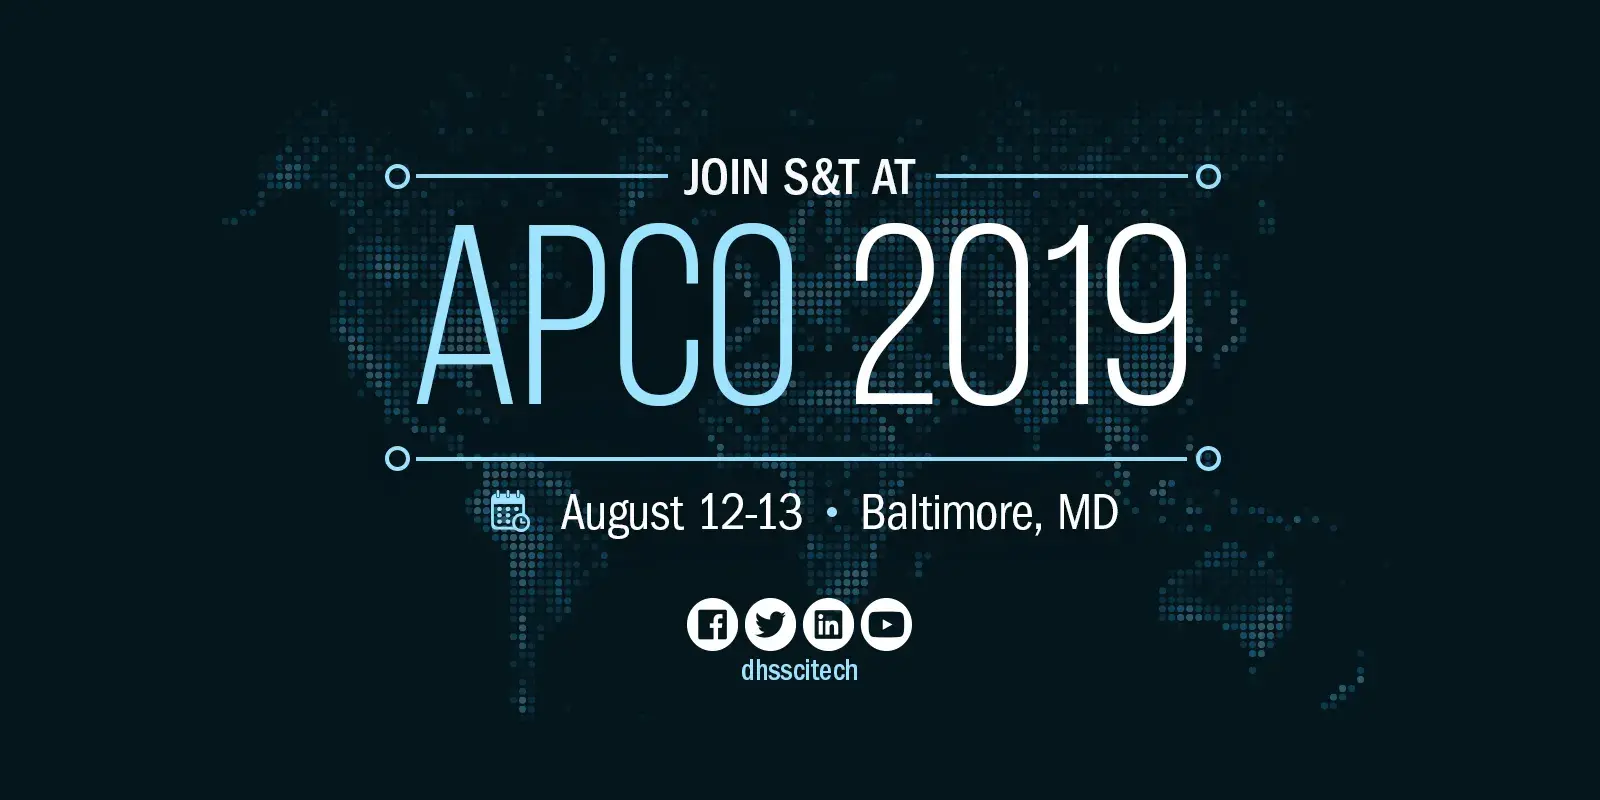 Join S&T at APCO 2019. August 12-13. Baltimore, Md. Facebook. Twitter. LinkedIn. YouTube. DHSScitTech.